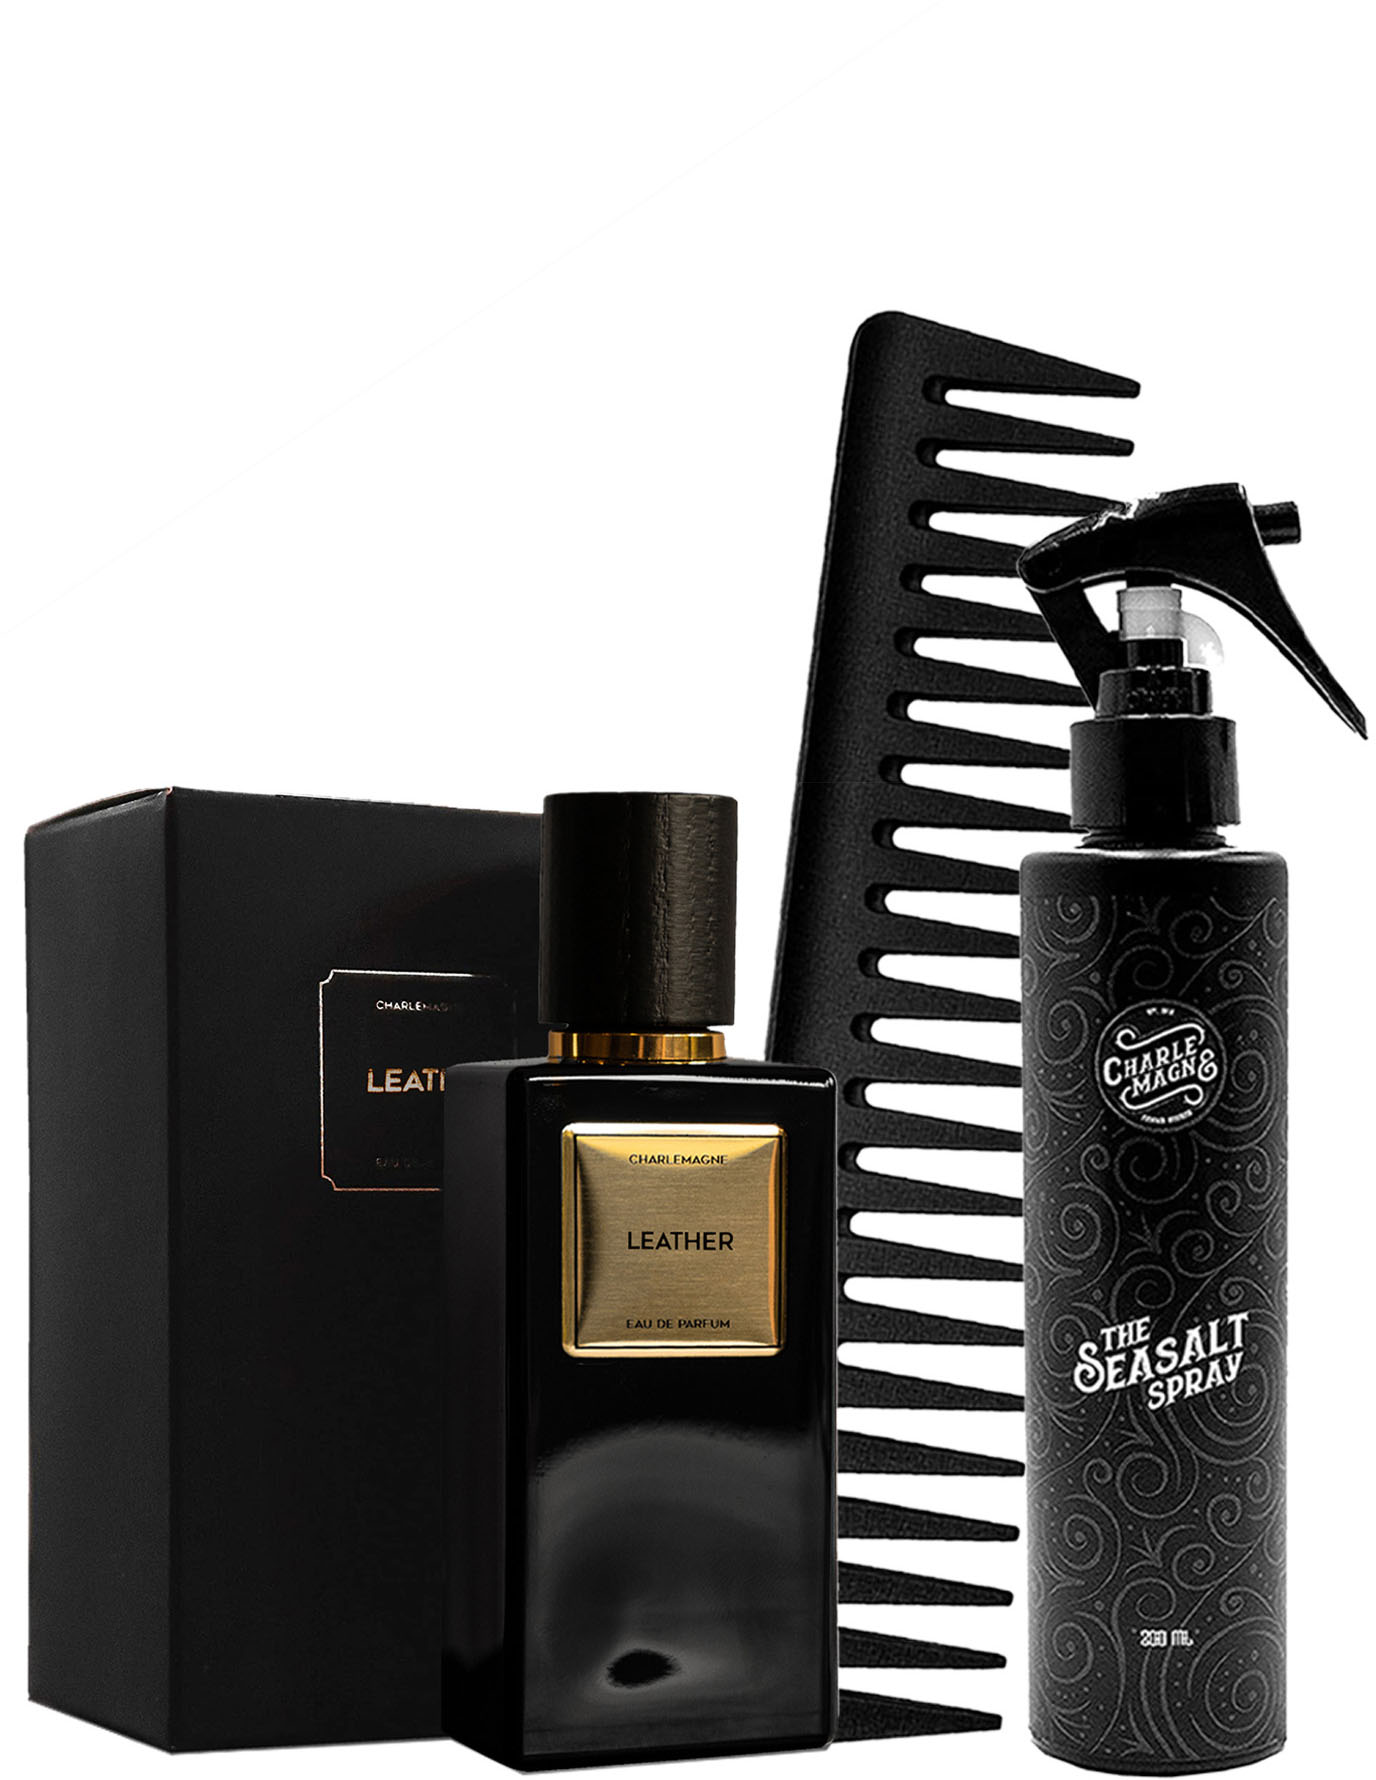 CHARLEMAGNE Duft-Set »The Scents«, tlg.) | (4 kaufen UNIVERSAL